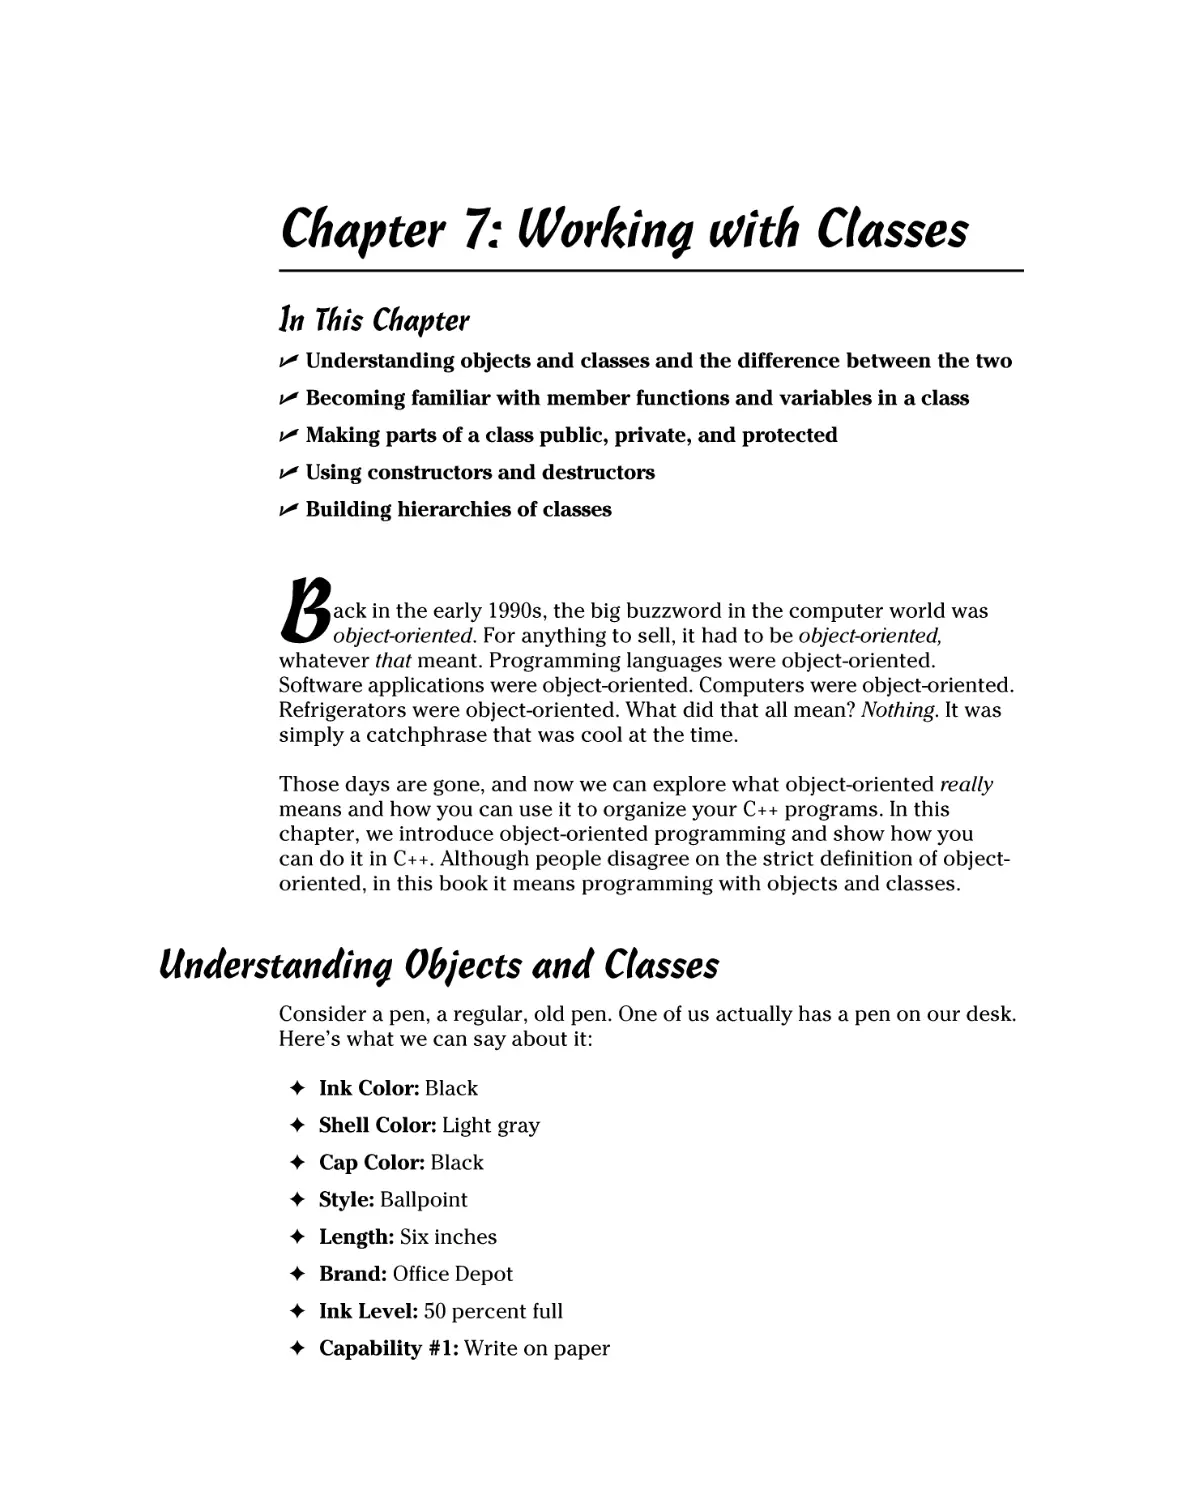 Chapter 7
Understanding Objects and Classes